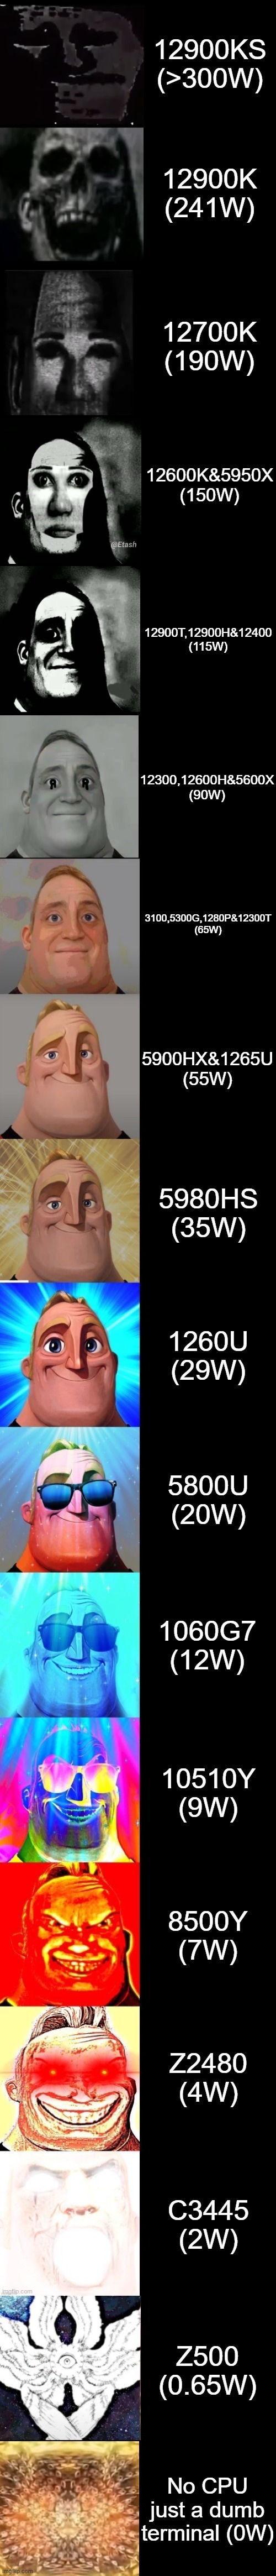 Trolololololo trololololo trolololo | 12900KS (>300W); 12900K (241W); 12700K (190W); 12600K&5950X (150W); 12900T,12900H&12400 (115W); 12300,12600H&5600X (90W); 3100,5300G,1280P&12300T (65W); 5900HX&1265U (55W); 5980HS (35W); 1260U (29W); 5800U (20W); 1060G7 (12W); 10510Y (9W); 8500Y (7W); Z2480 (4W); C3445 (2W); Z500 (0.65W); No CPU just a dumb terminal (0W) | image tagged in mr incredible from trollge to god | made w/ Imgflip meme maker